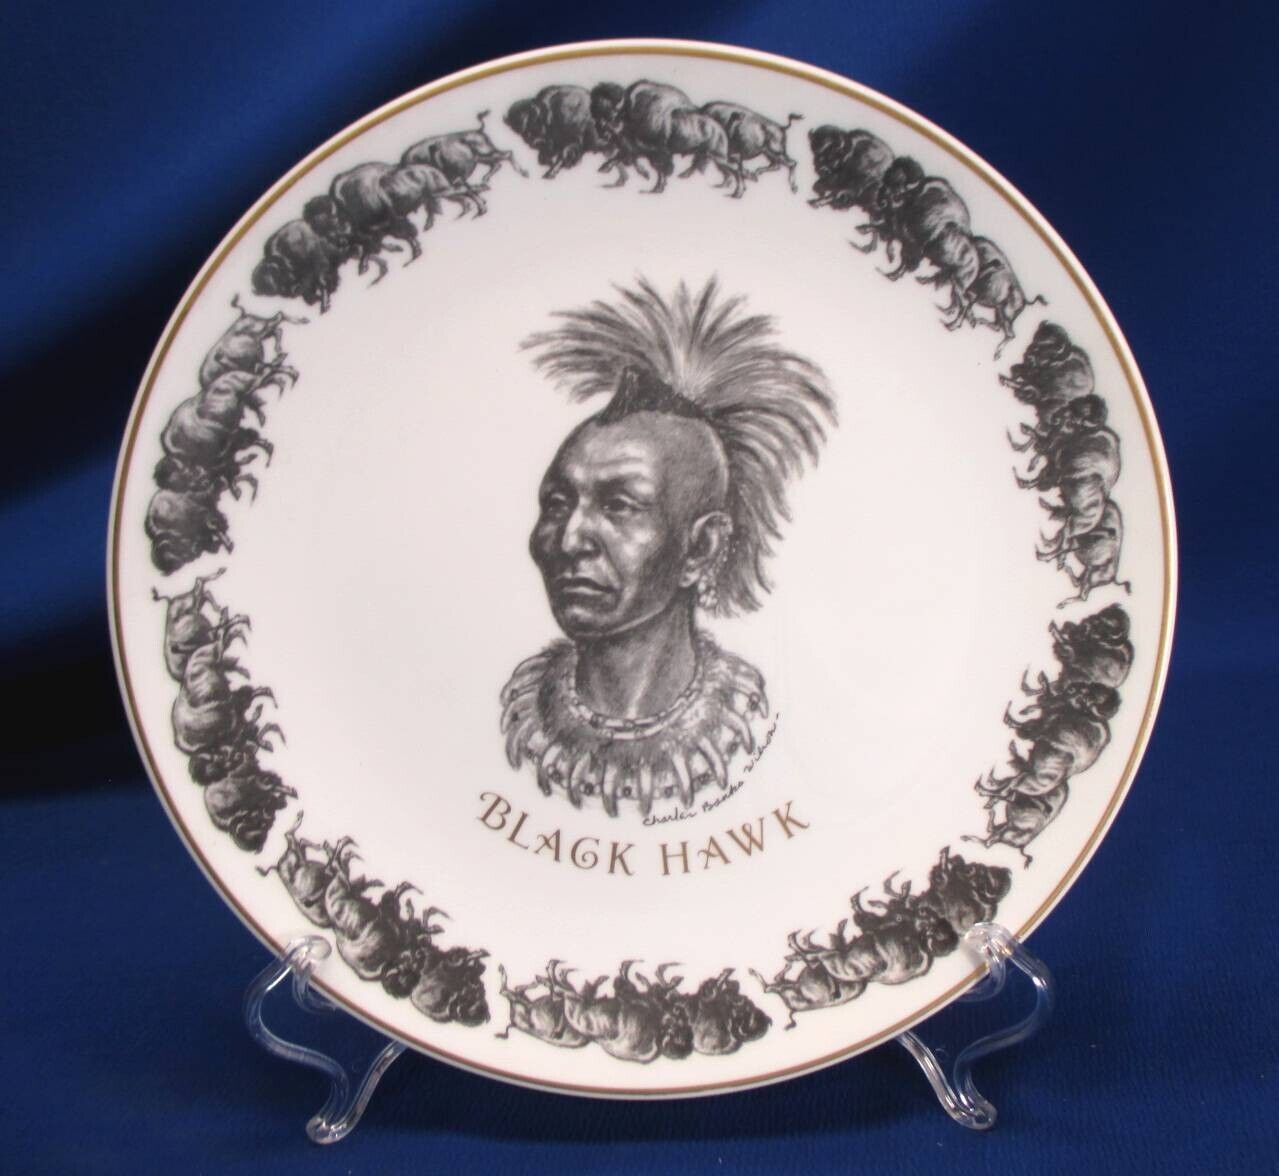 1971 WEDGWOOD COMMEMORATIVE PLATE FIRST AMERICANS CHIEF BLACK HAWK